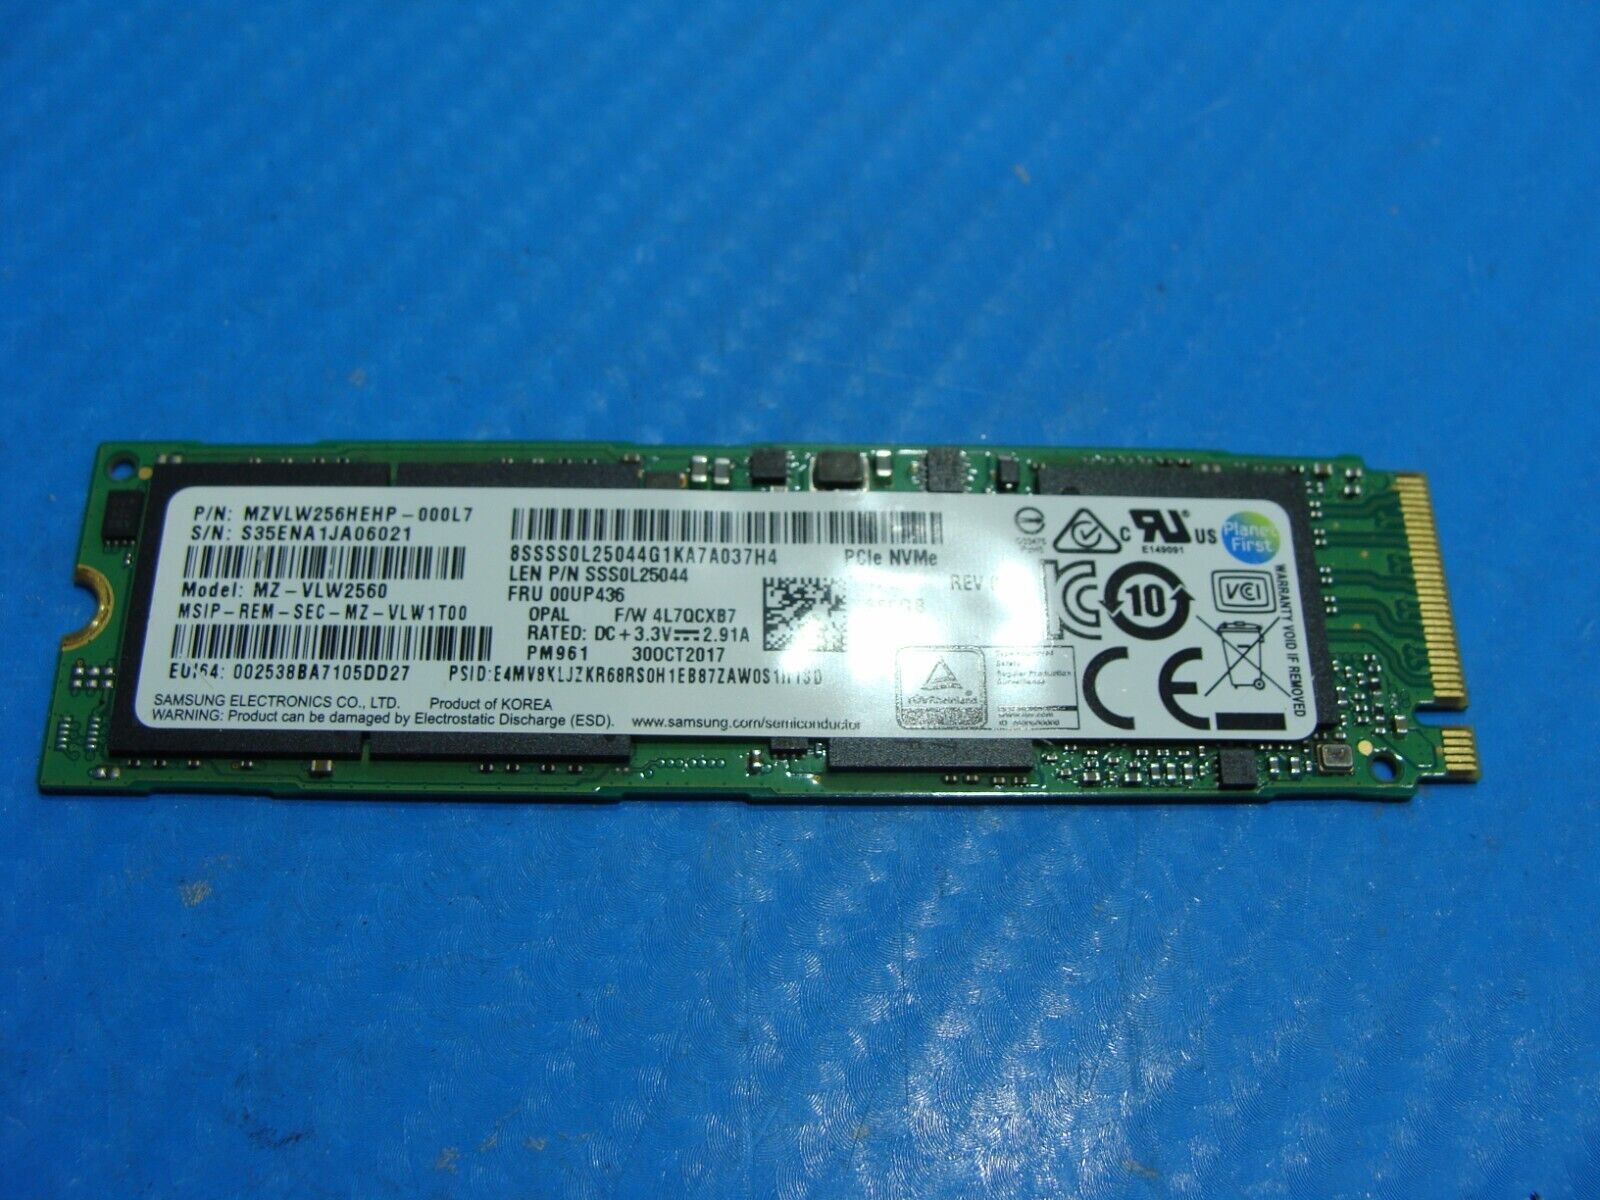 Lenovo P1 Gen 1 Samsung 256GB NVMe M.2 SSD Solid State Drive 00UP436 MZ-VLW2560